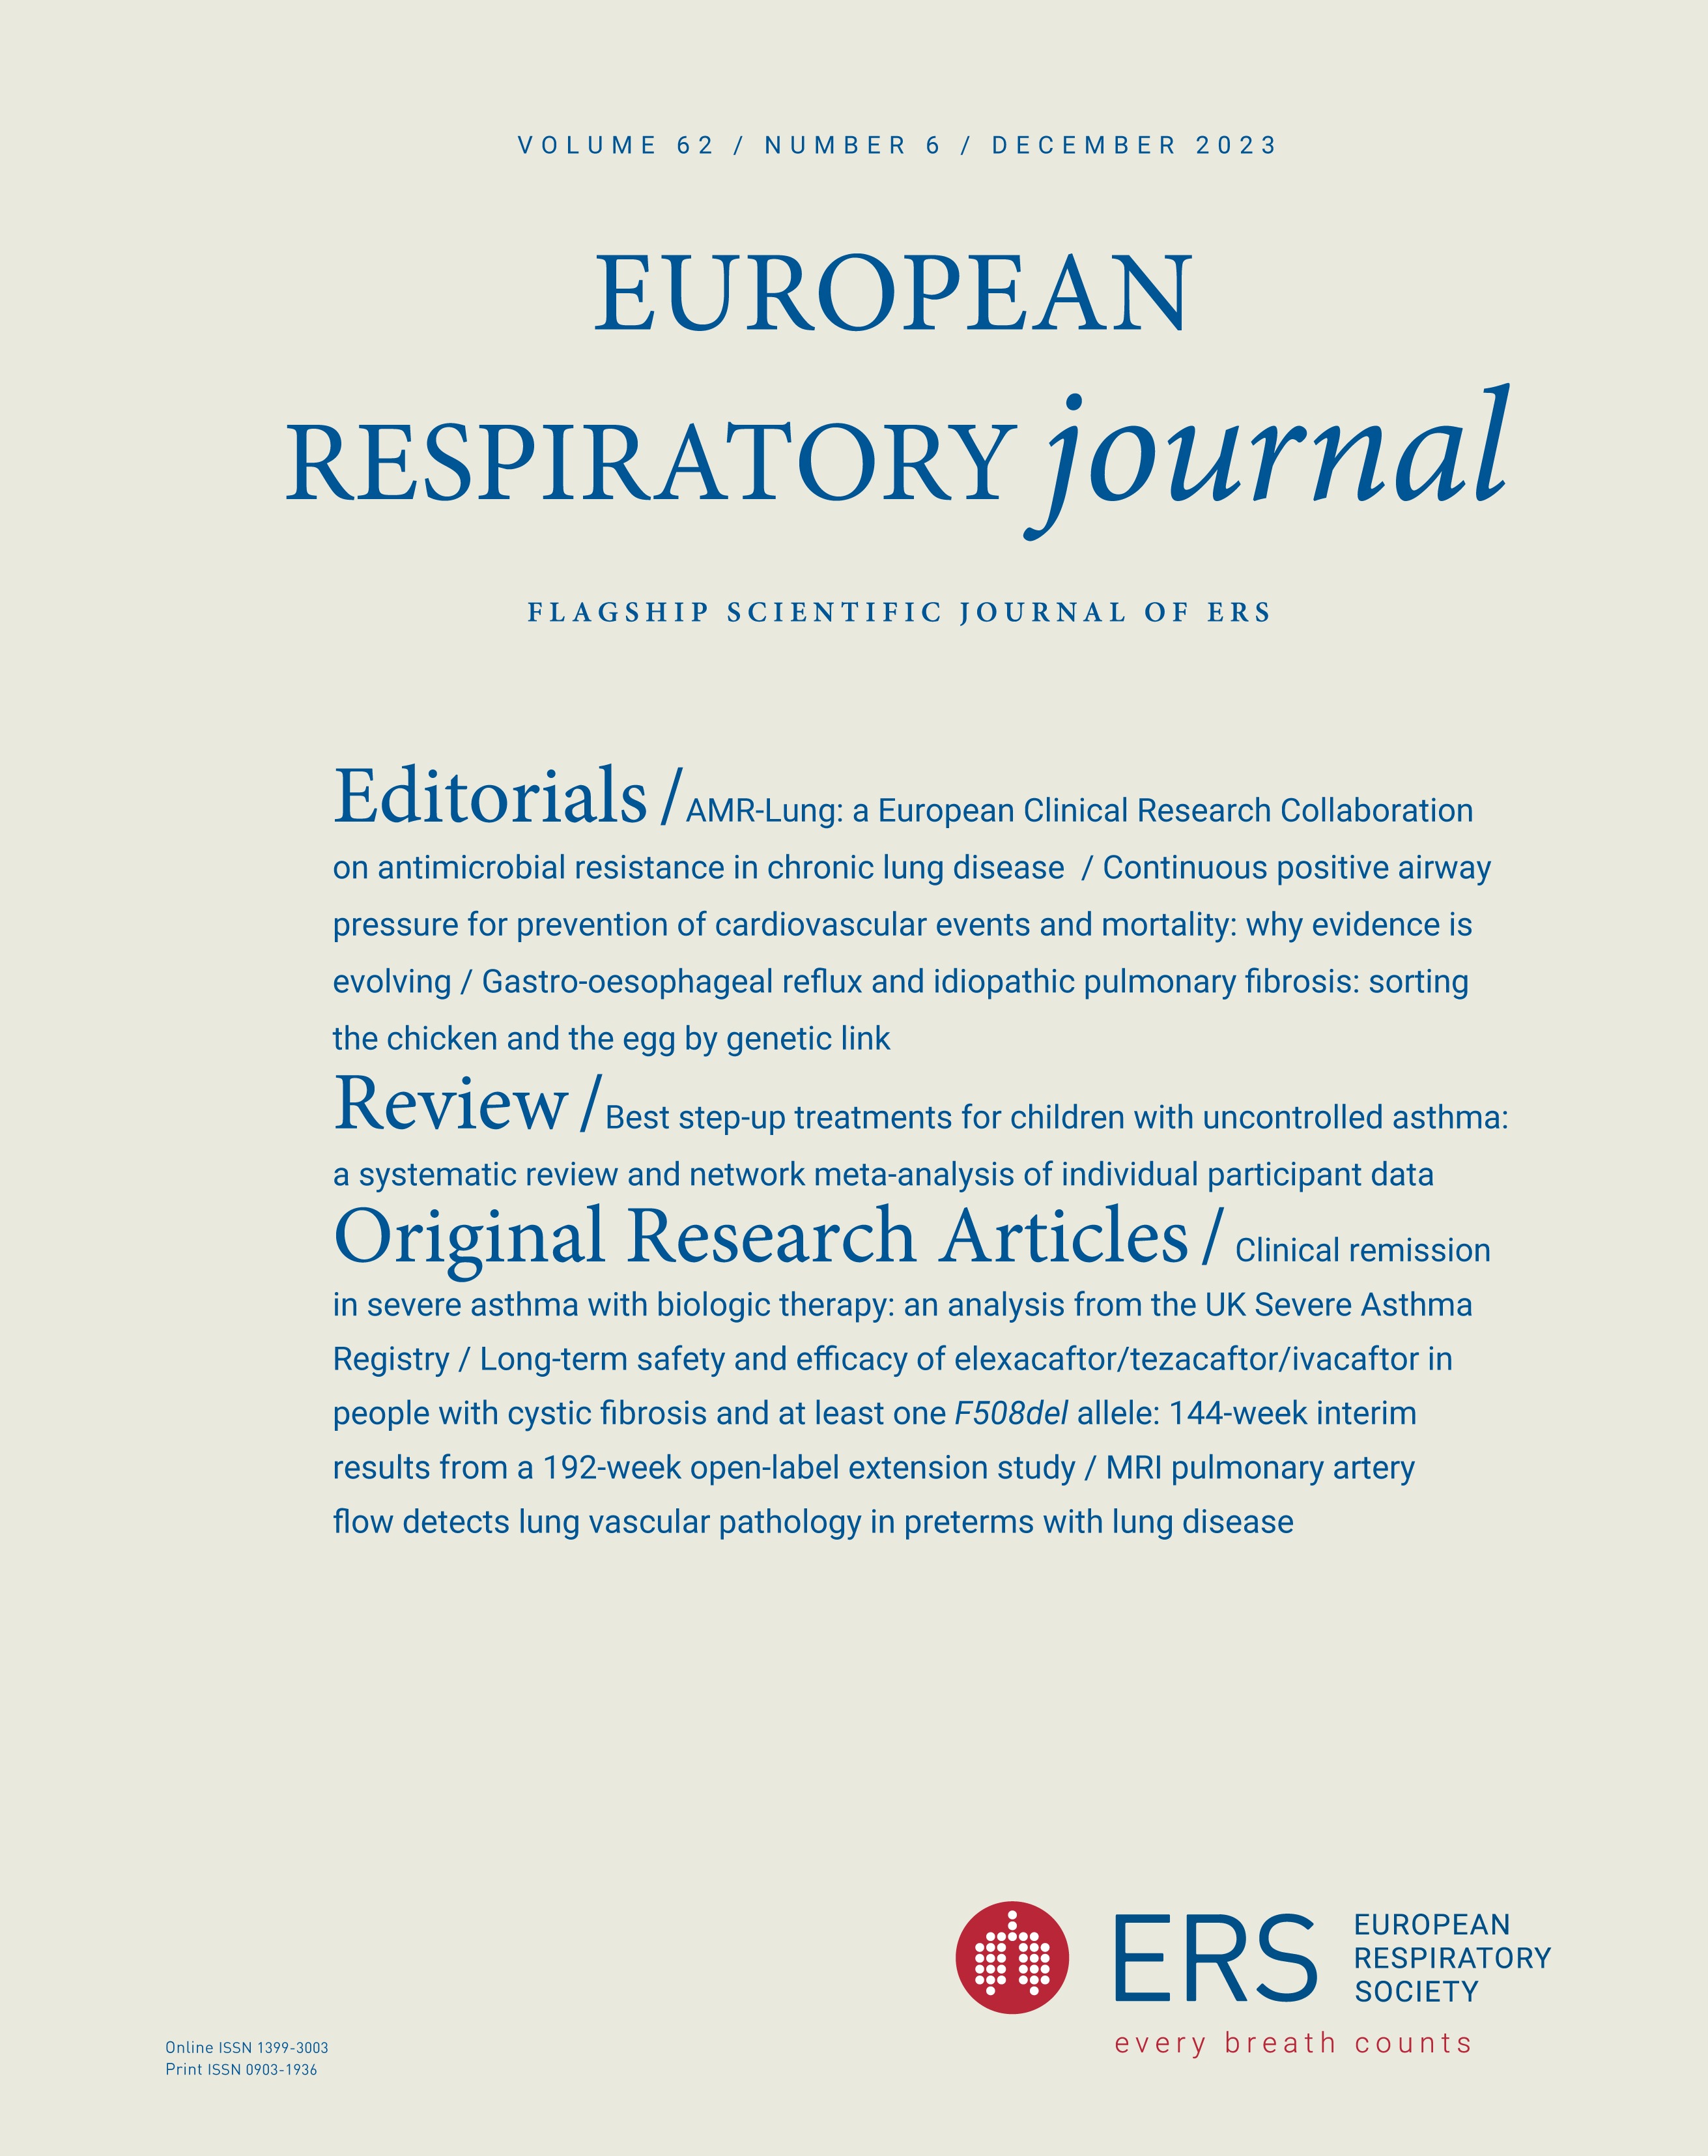 Lung transcriptome of e-cigarette users reveals changes related to chronic lung disease